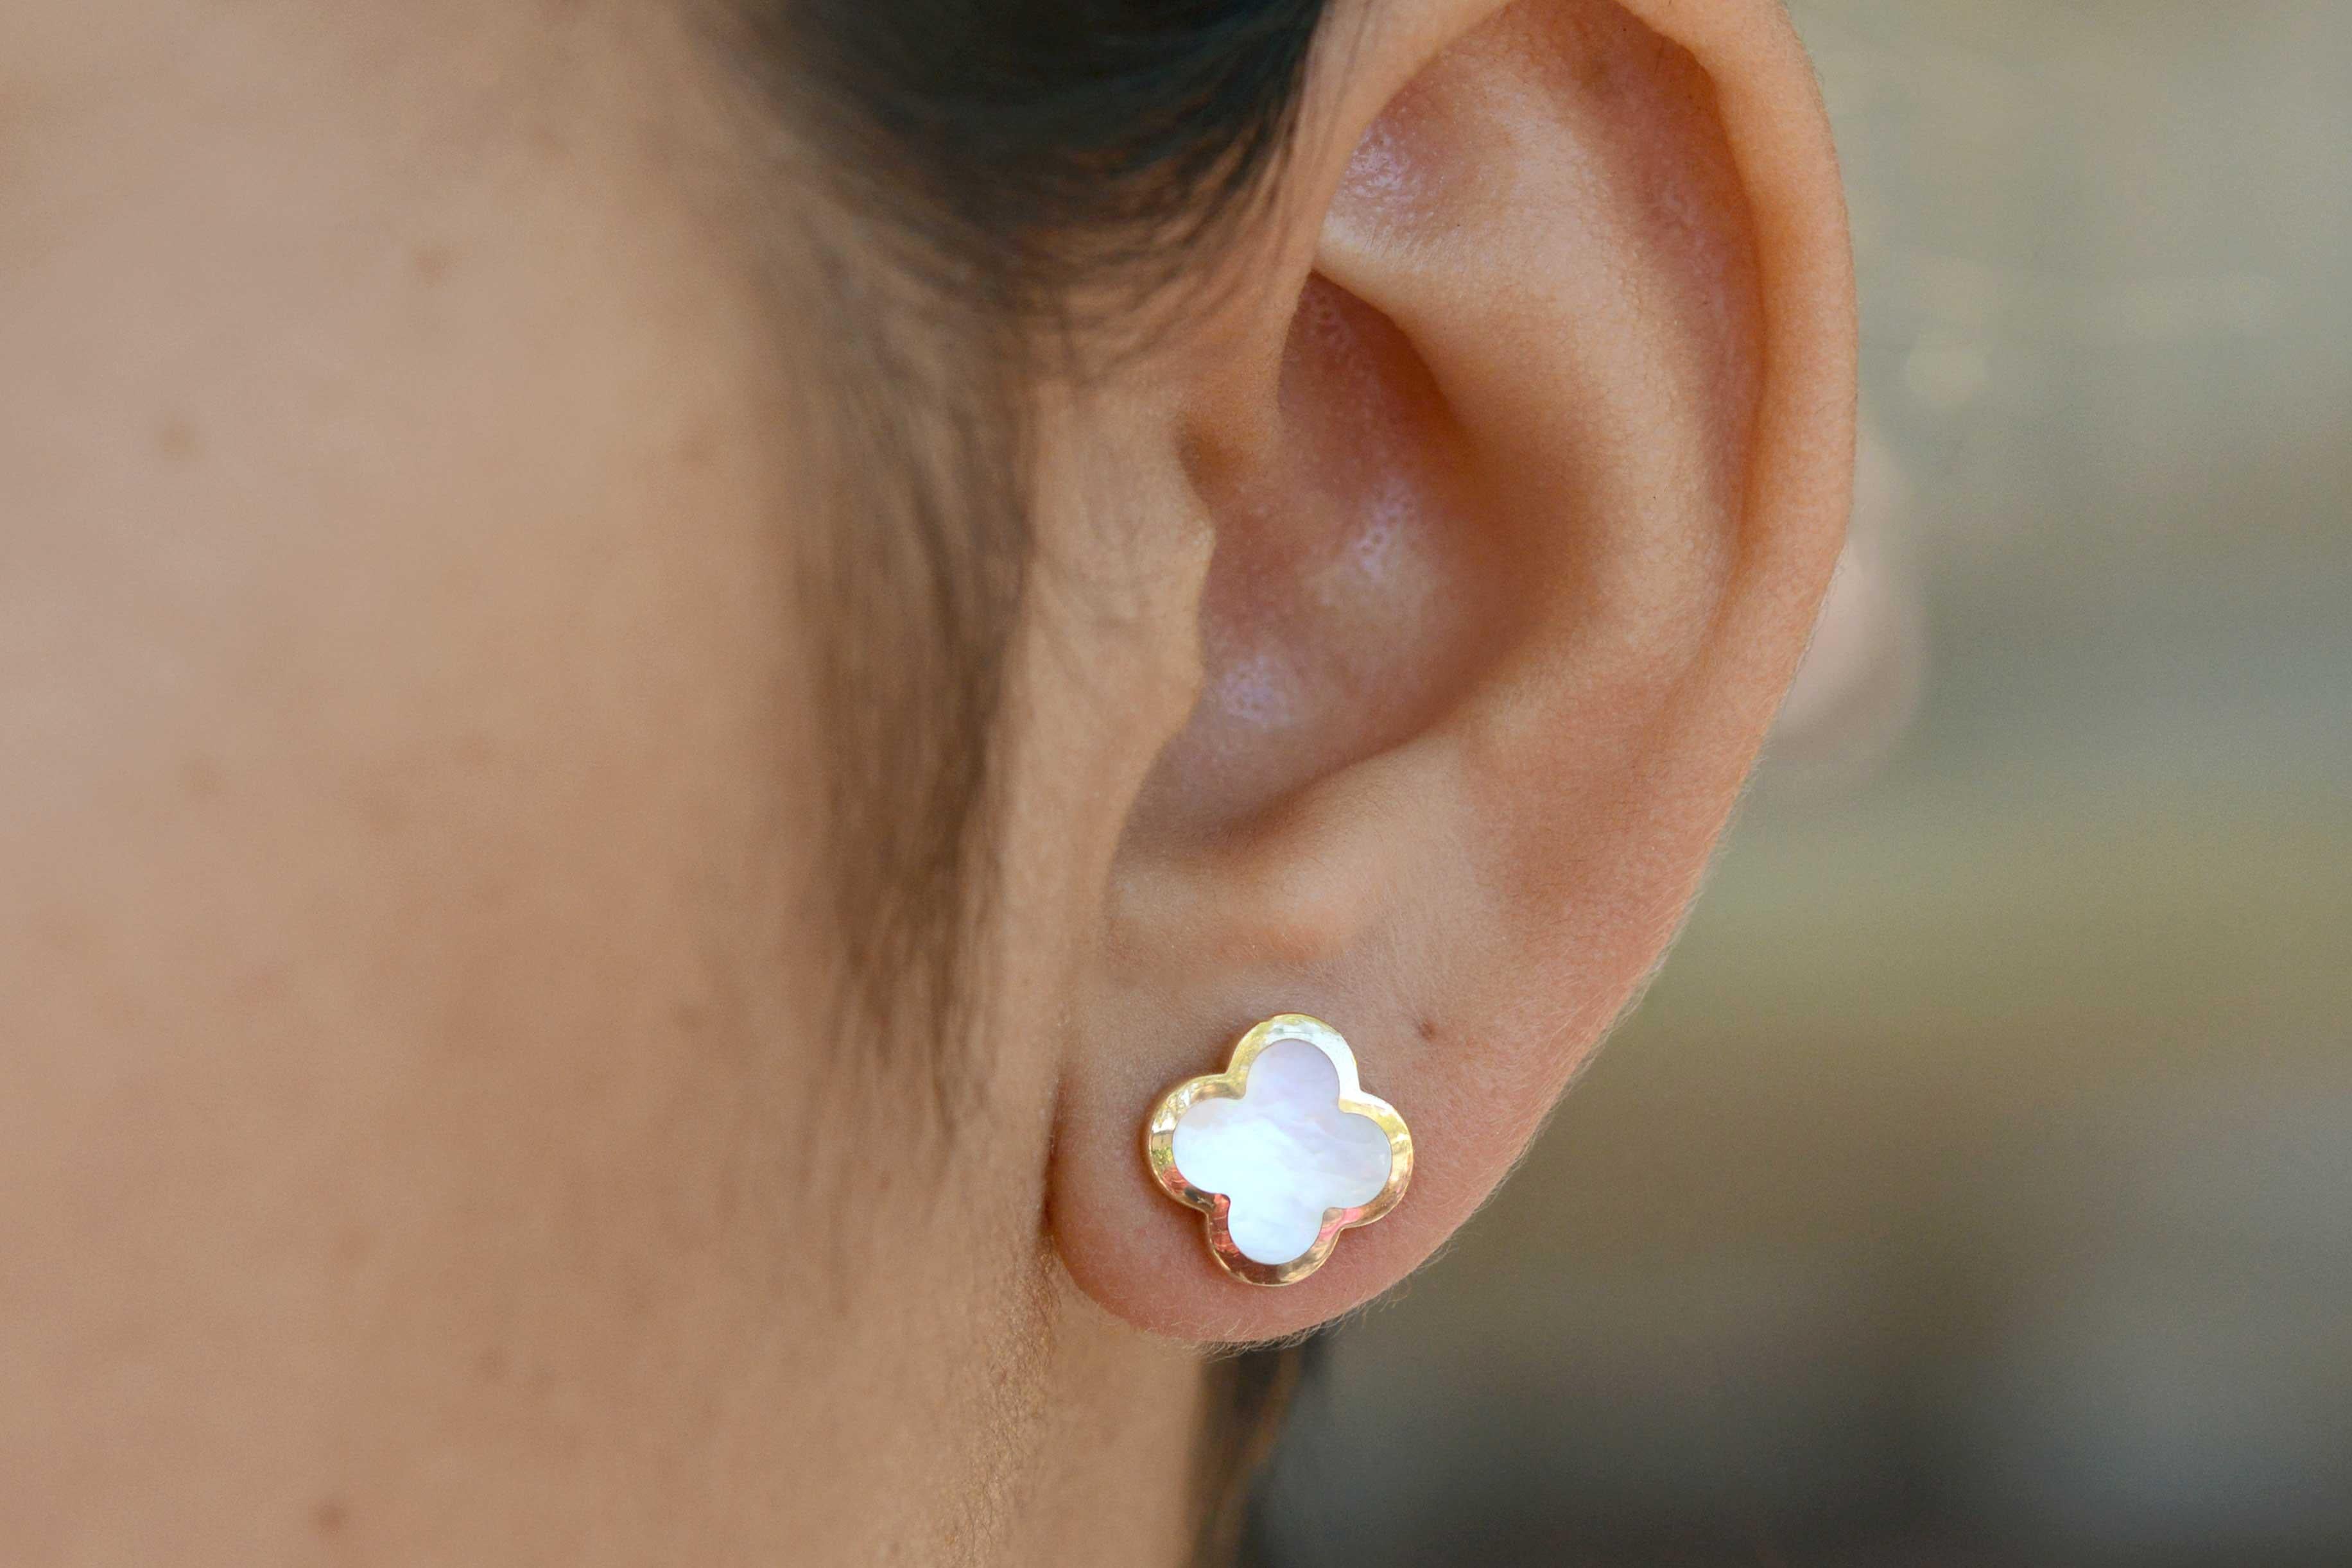 A lovely pair of authentic Van Cleef & Arpels mother of pearl earstuds. With the Pure Alhambra® jewelry creations designed in 2001, a new interpretation of the Alhambra symbol. Inspired by the clover leaf, they give pride of place to the purity and